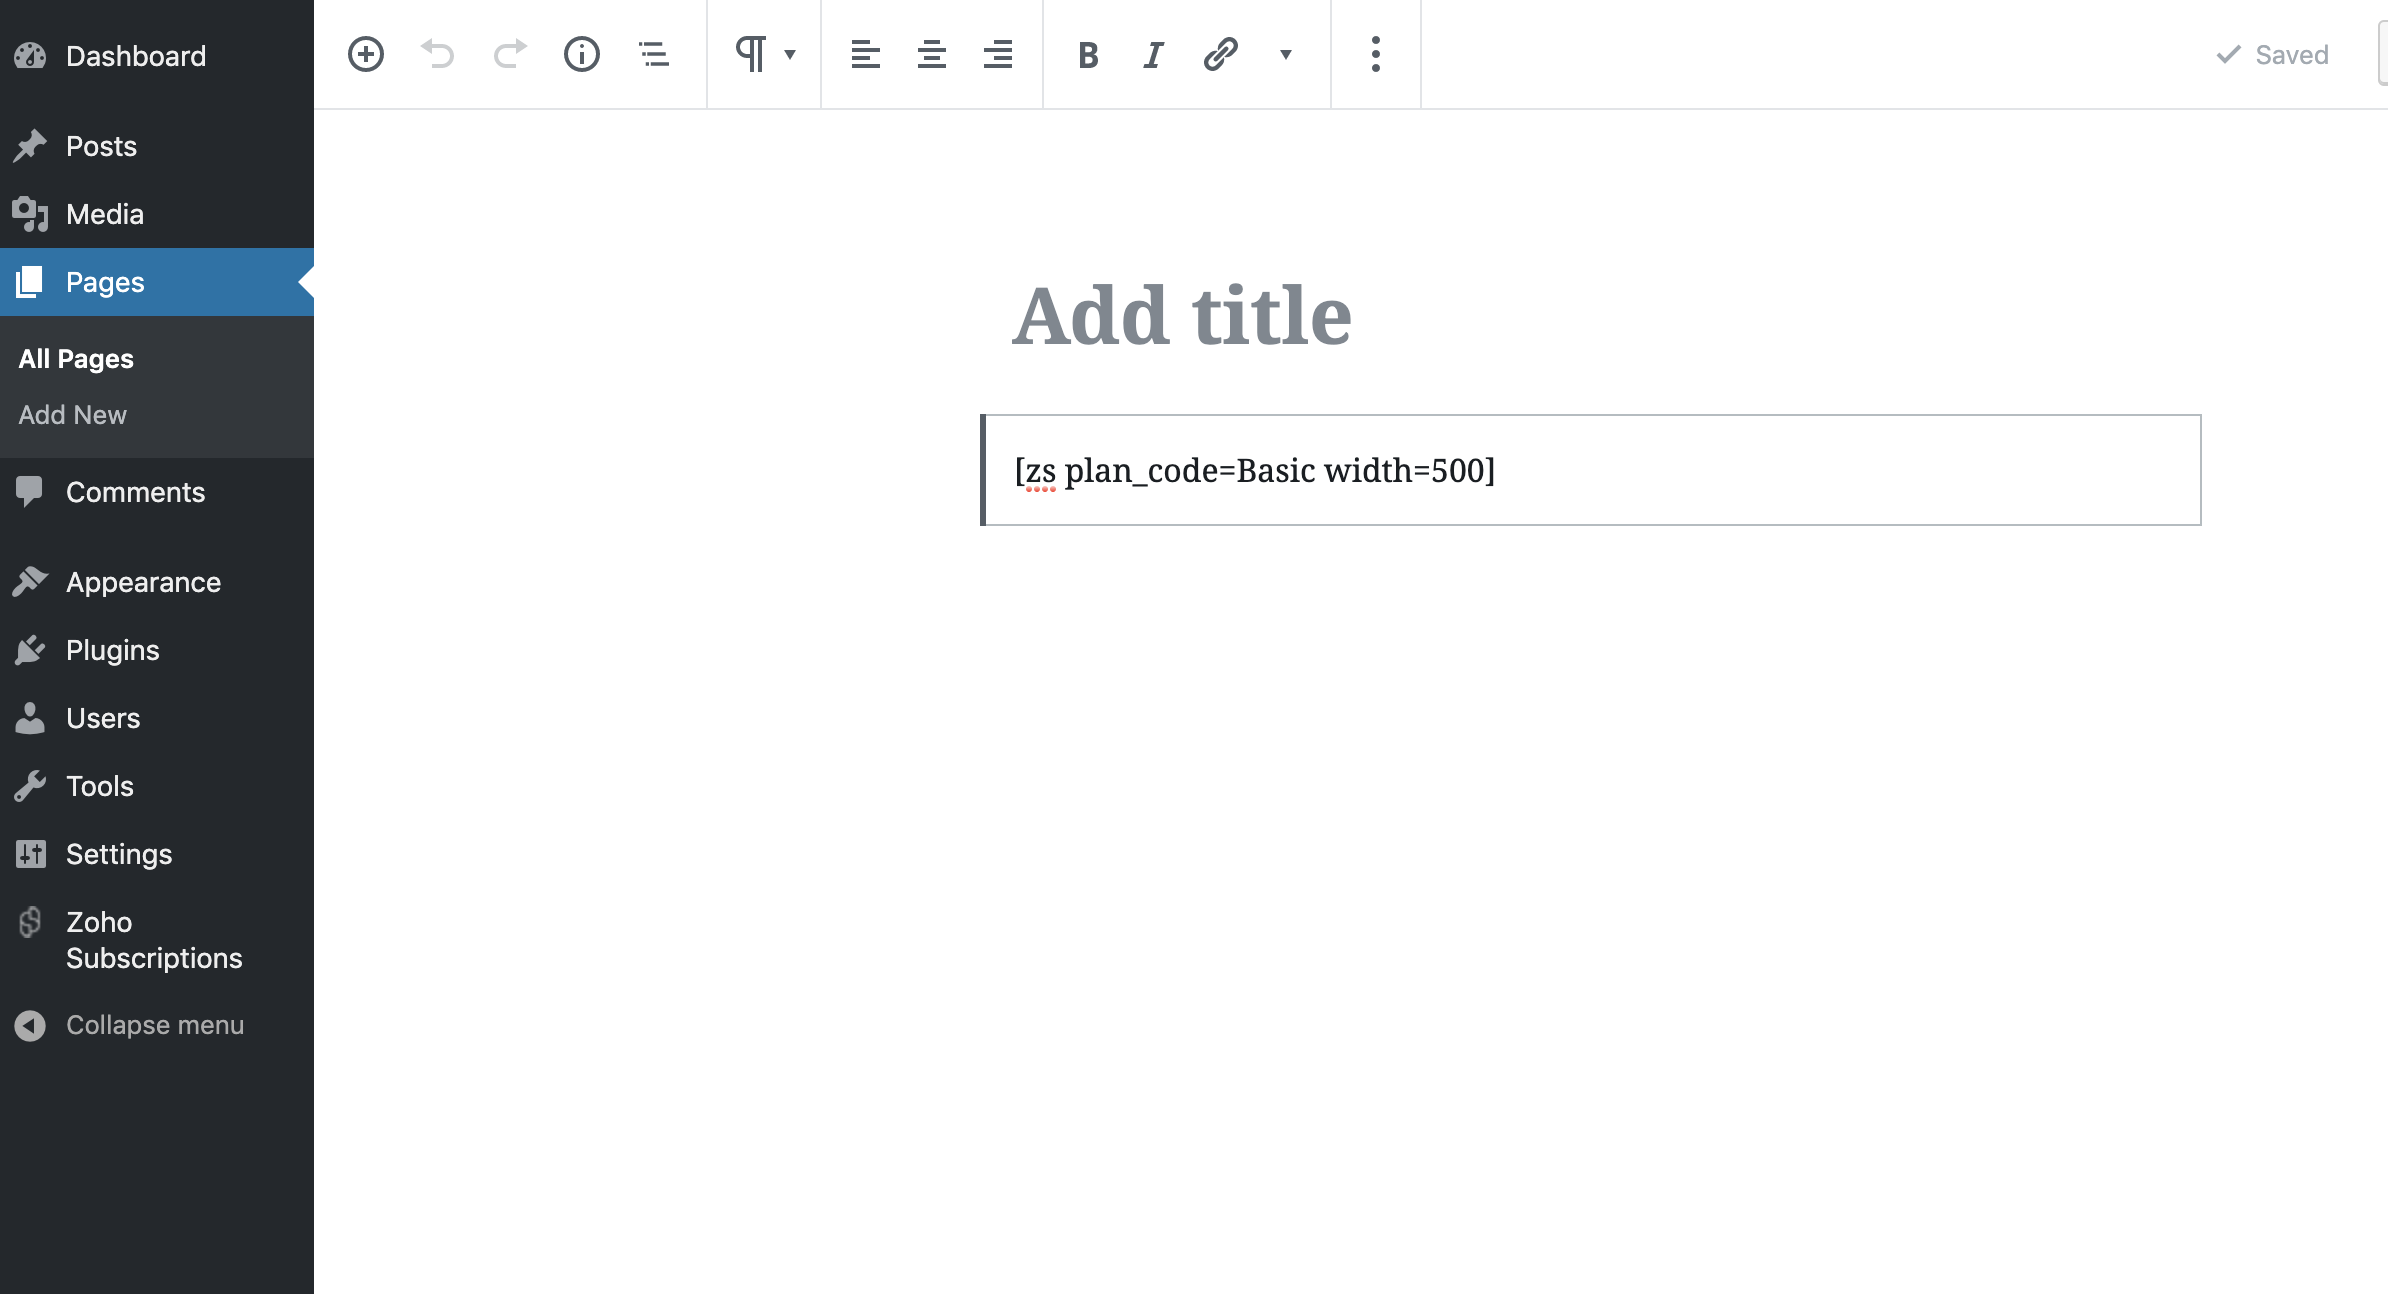 Zoho Subscriptions shortcode added in the page editor with the plan_code as "Basic" and width as "500"